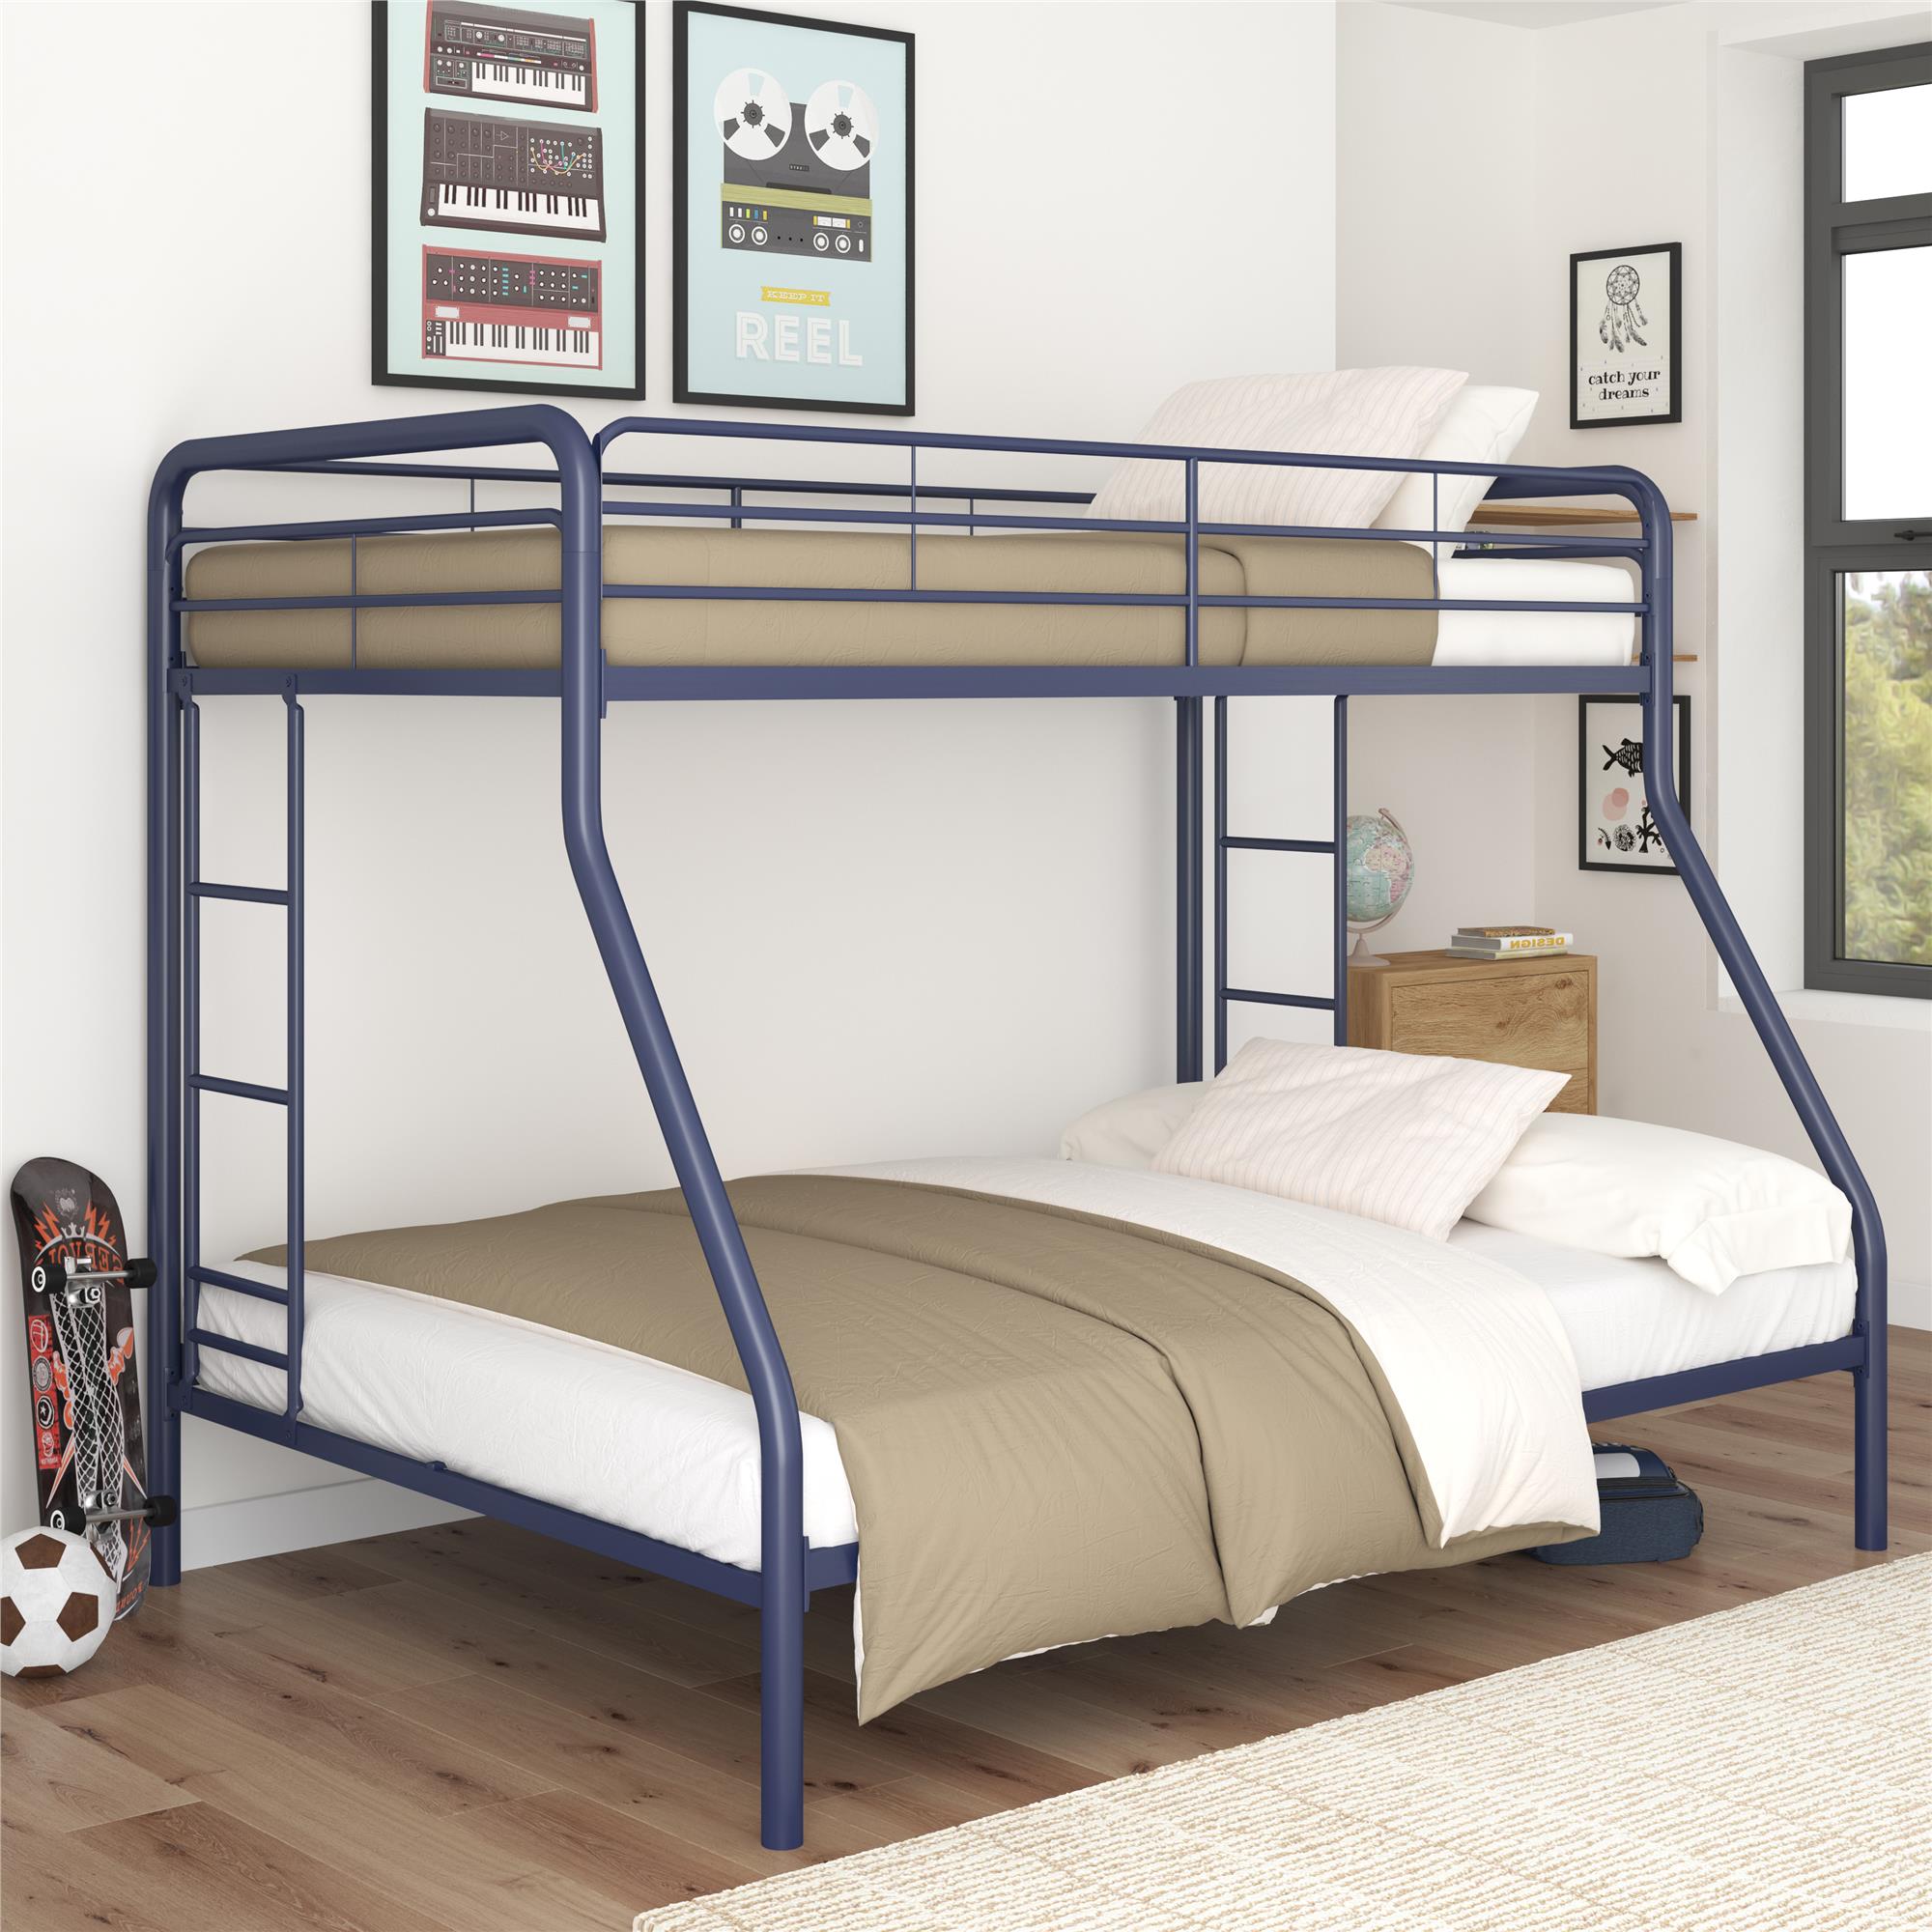 DHP Dusty Twin over Full Metal Bunk Bed with Secured Ladders, Blue - image 1 of 20